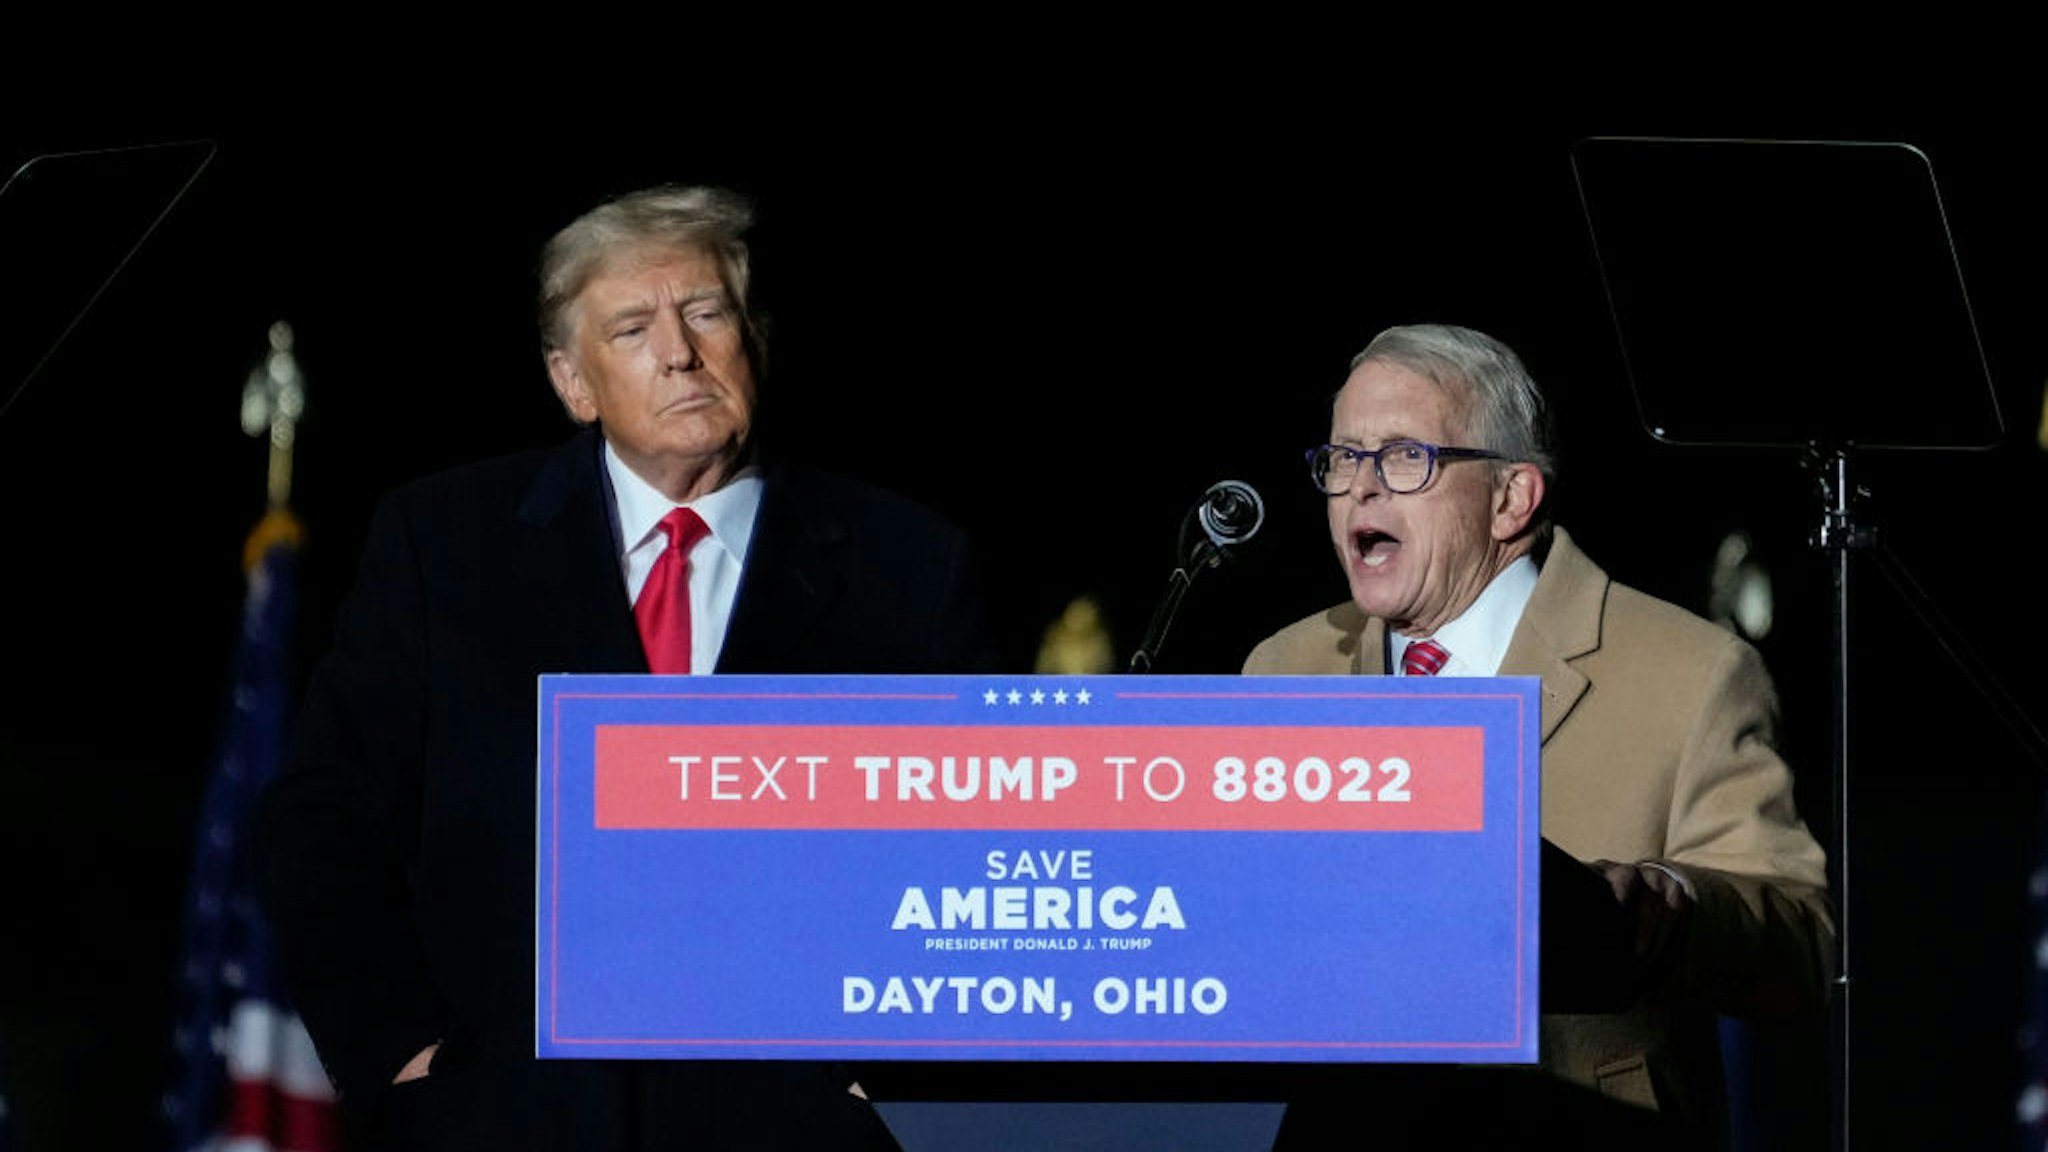 VANDALIA, OHIO - NOVEMBER 07: Former U.S. President Donald Trump (L) looks on as Ohio Gov. Mike DeWine speaks at a rally for Ohio Republicans at the Dayton International Airport on November 7, 2022 in Vandalia, Ohio. Trump is campaigning for Republican candidates, including U.S. Senate candidate JD Vance, who faces U.S. Rep. Tim Ryan (D-OH) in tomorrow's general election.